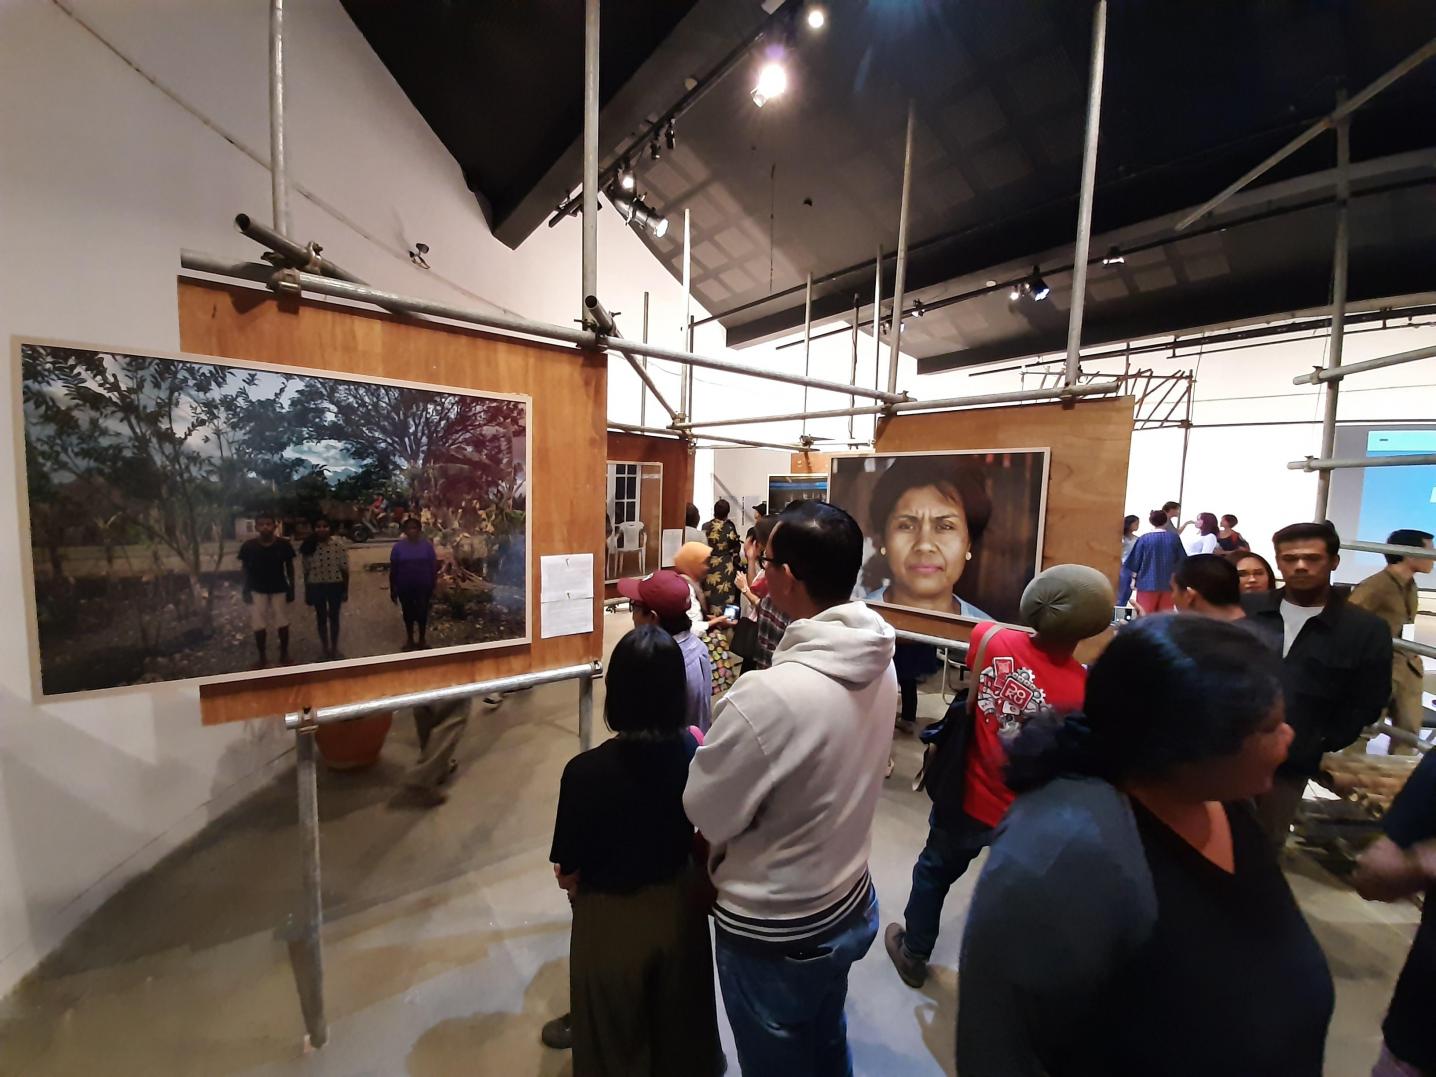 Impression of the exhibitions at LIFEs 2019 'My story, shared history', October 2019. Photo: Remco Vermeulen